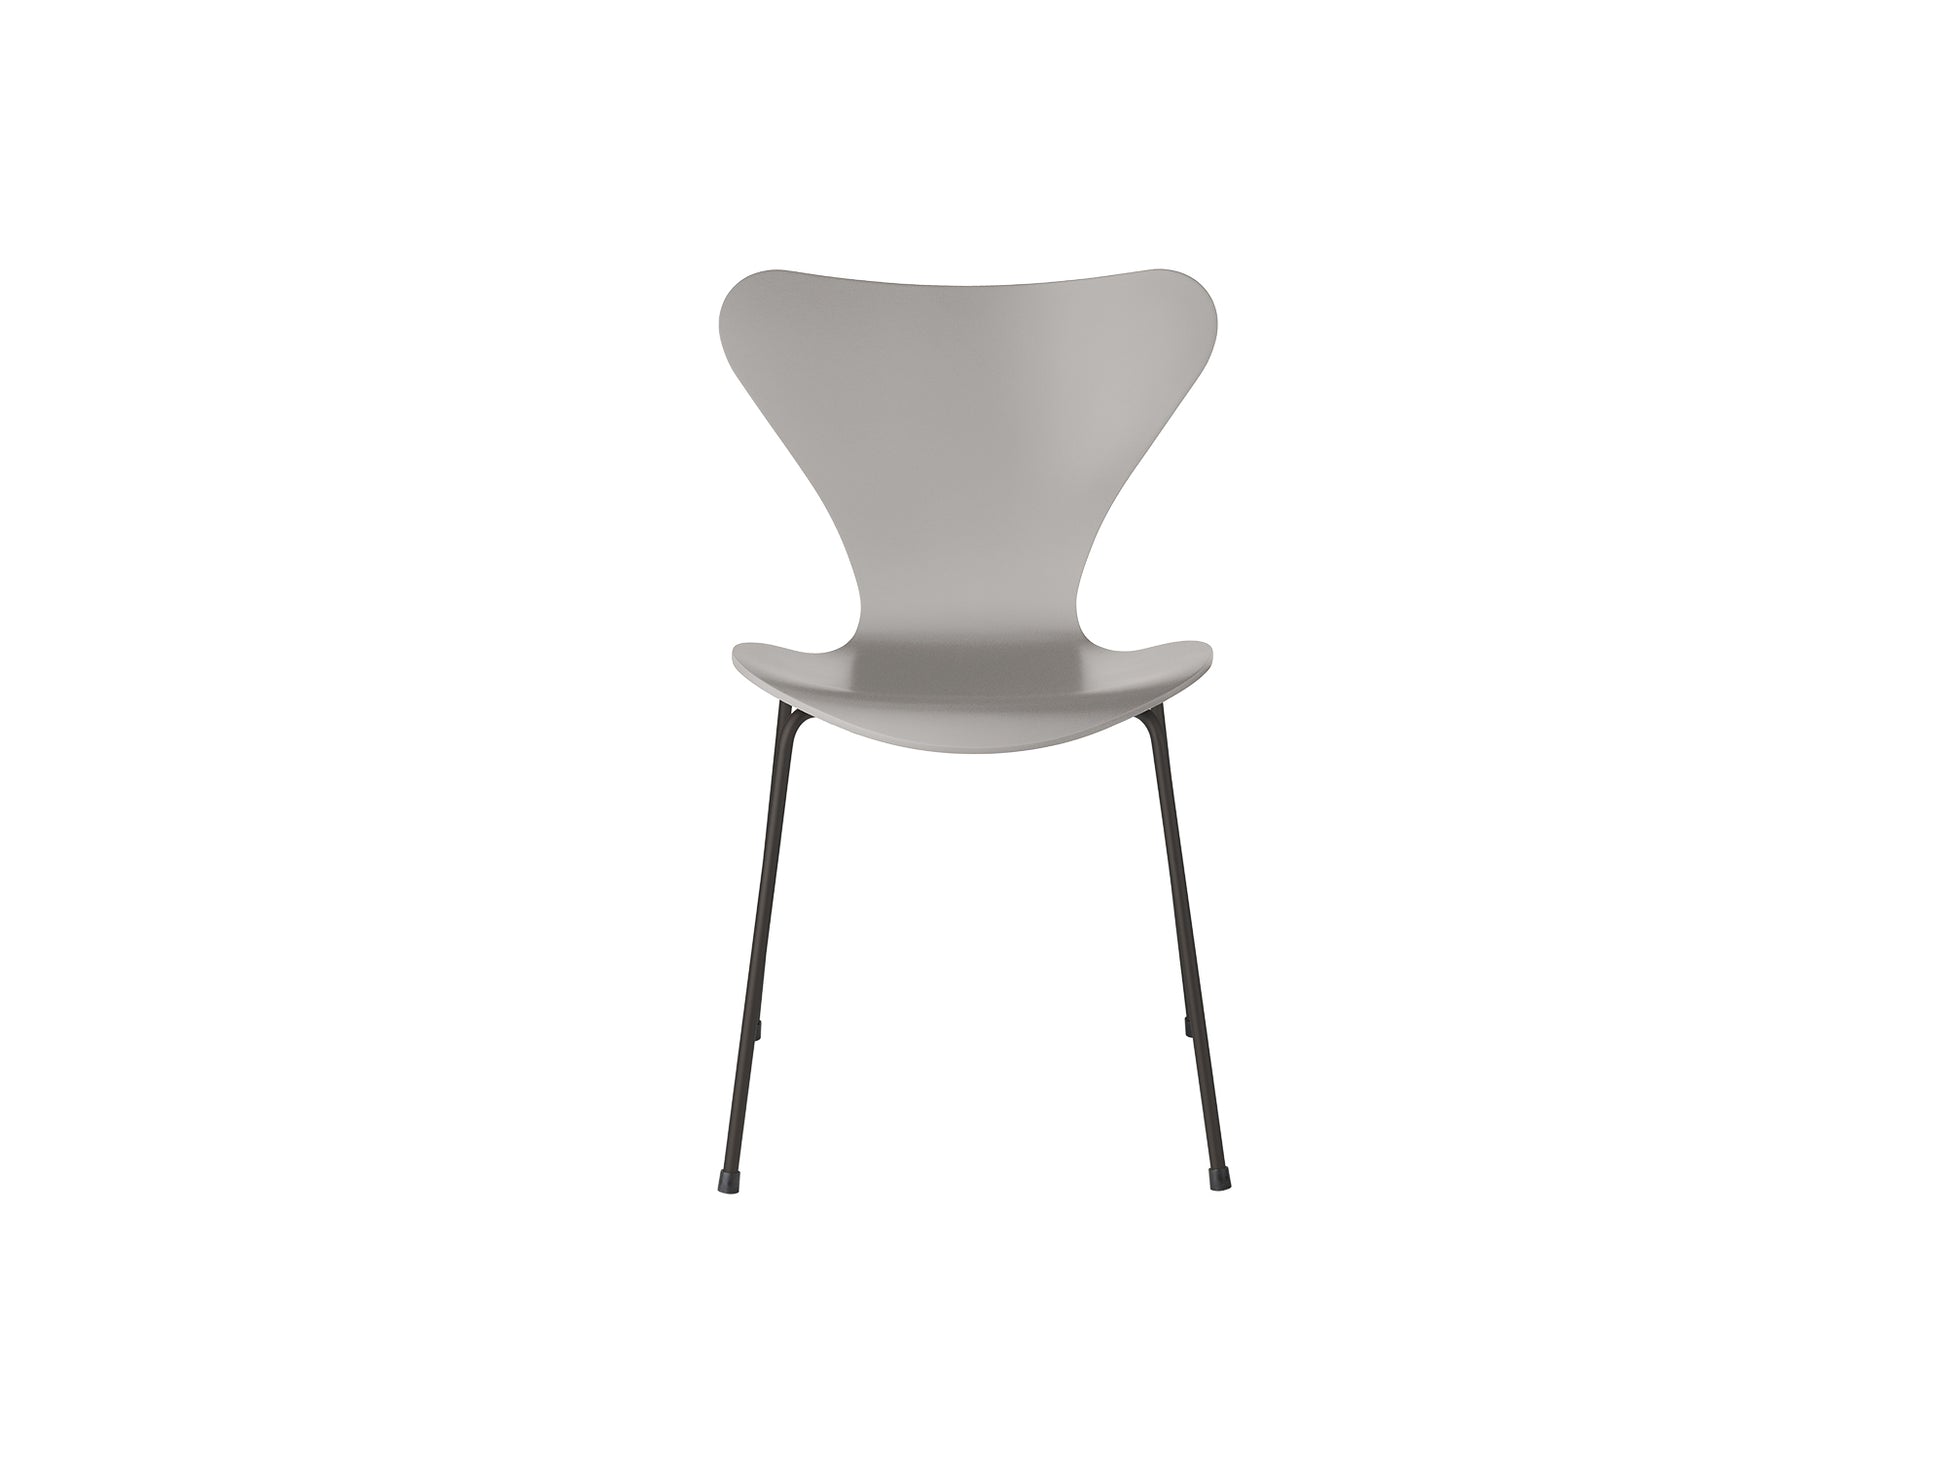 Series 7™ 3107 Dining Chair by Fritz Hansen - Nine Grey Lacquered Veneer Shell / Warm Graphite Steel